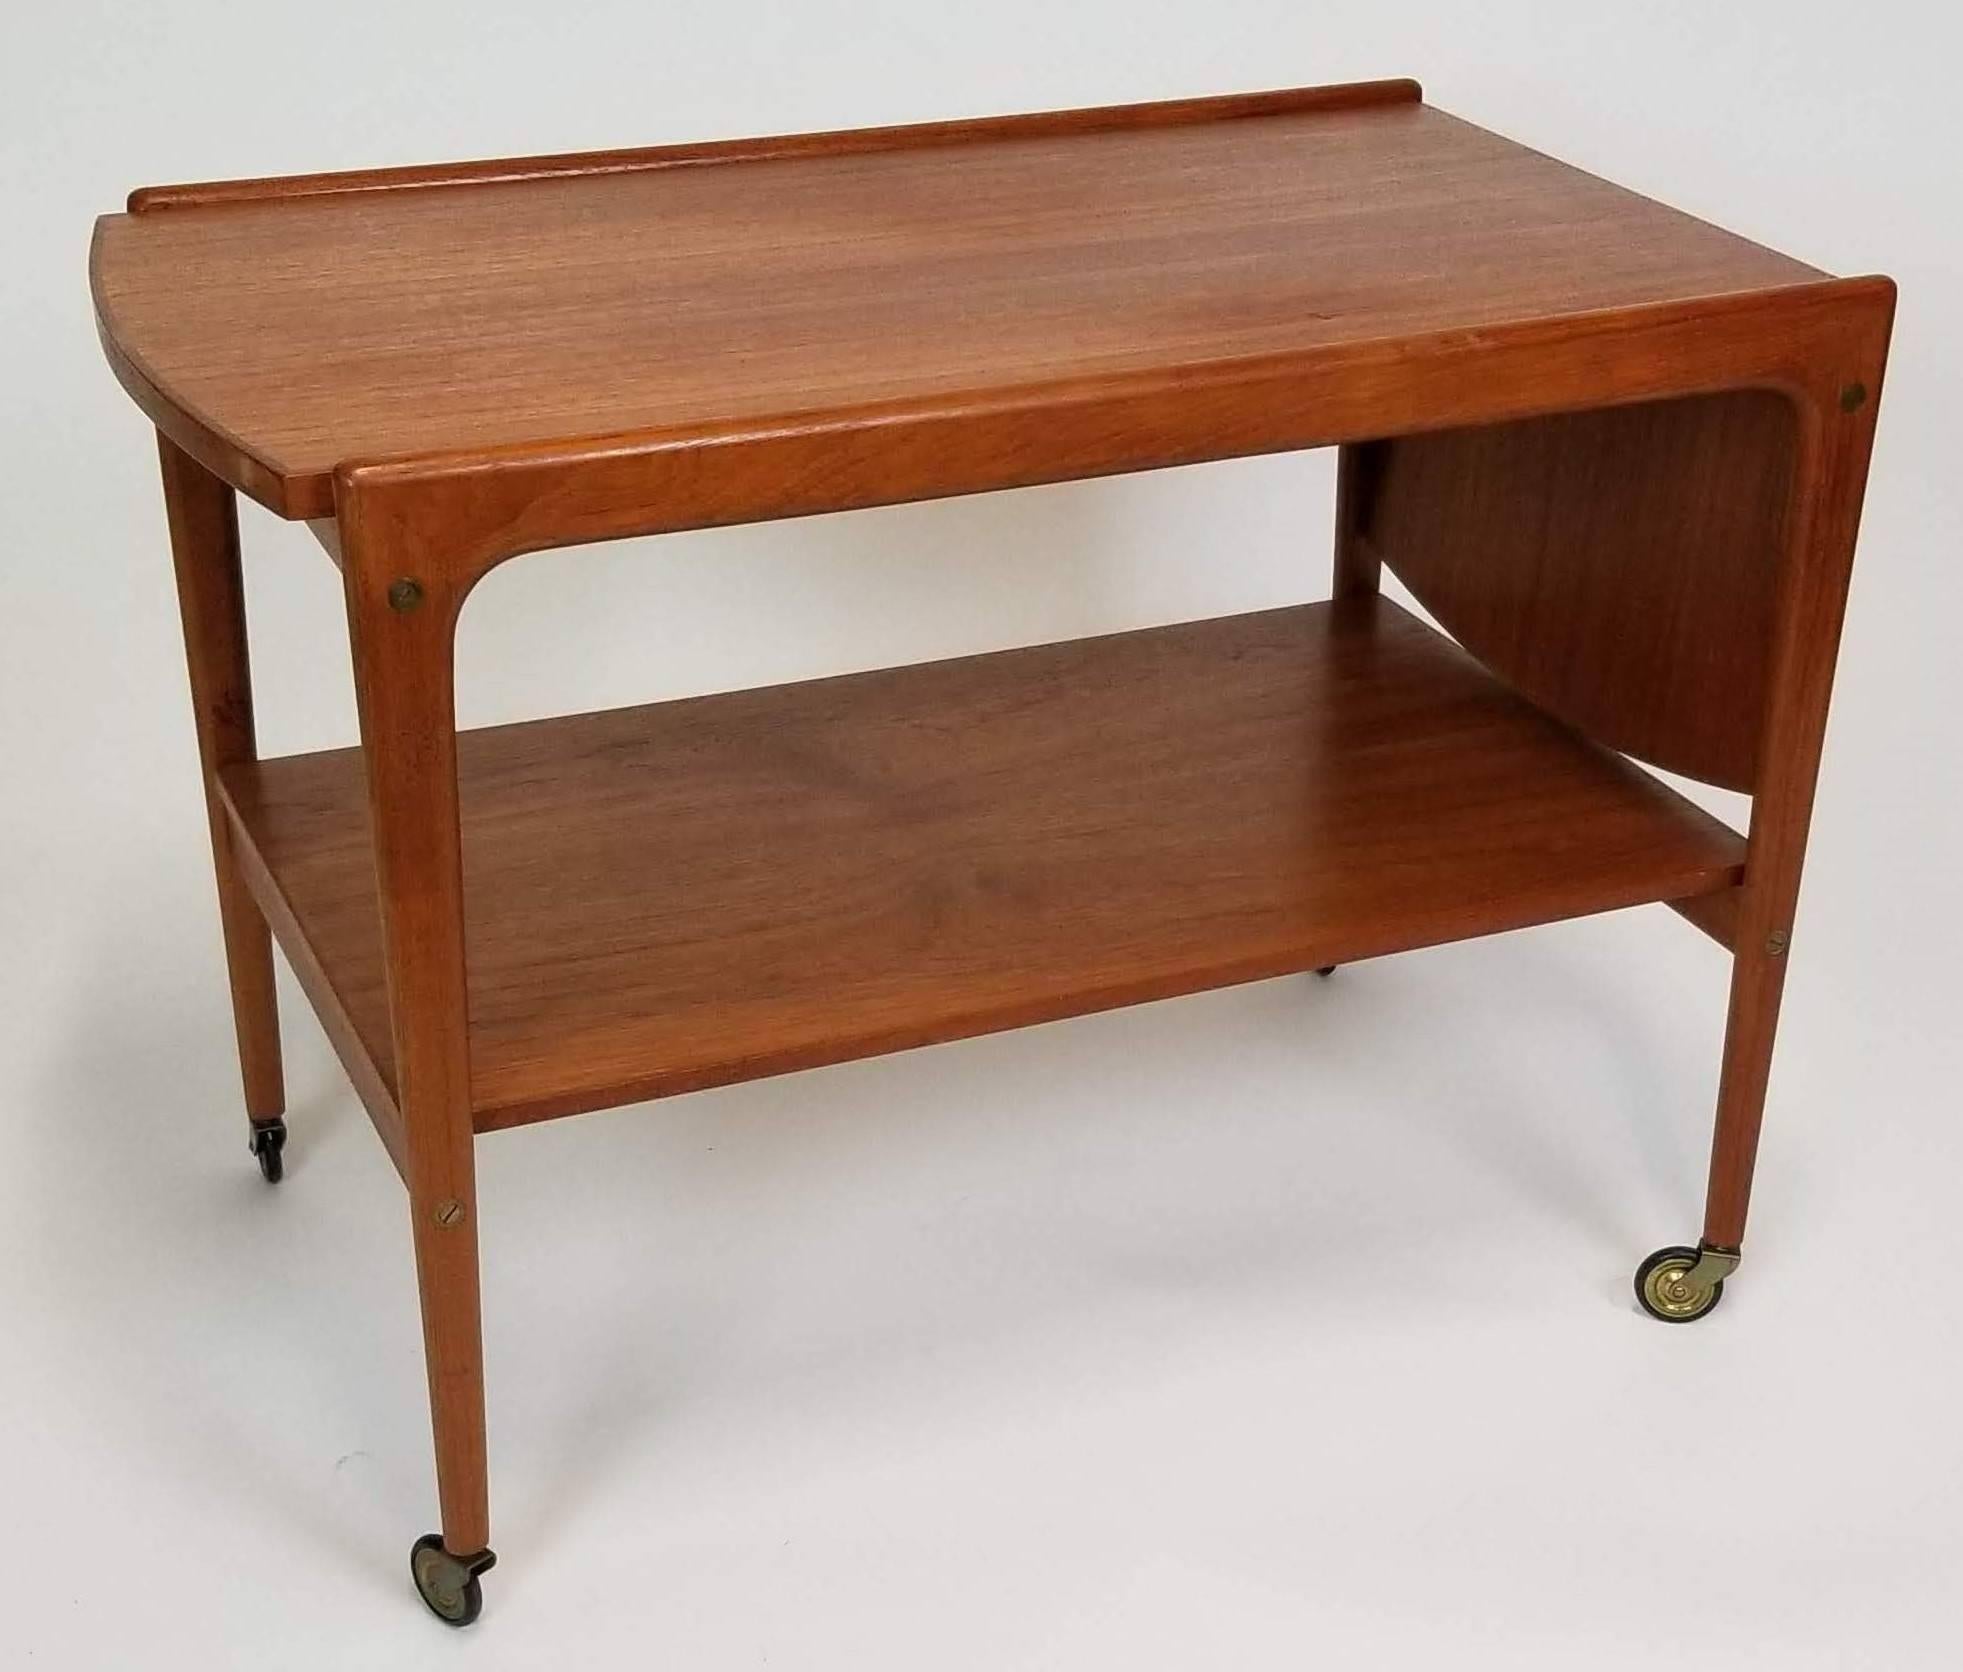 Midcentury Scandinavian Modern rolling teak tea trolley/bar cart by Yngve Ekström, made in Sweden. The cart has a drop-leaf top, which lifts and slides to expand. Open, the surface measures 42.5